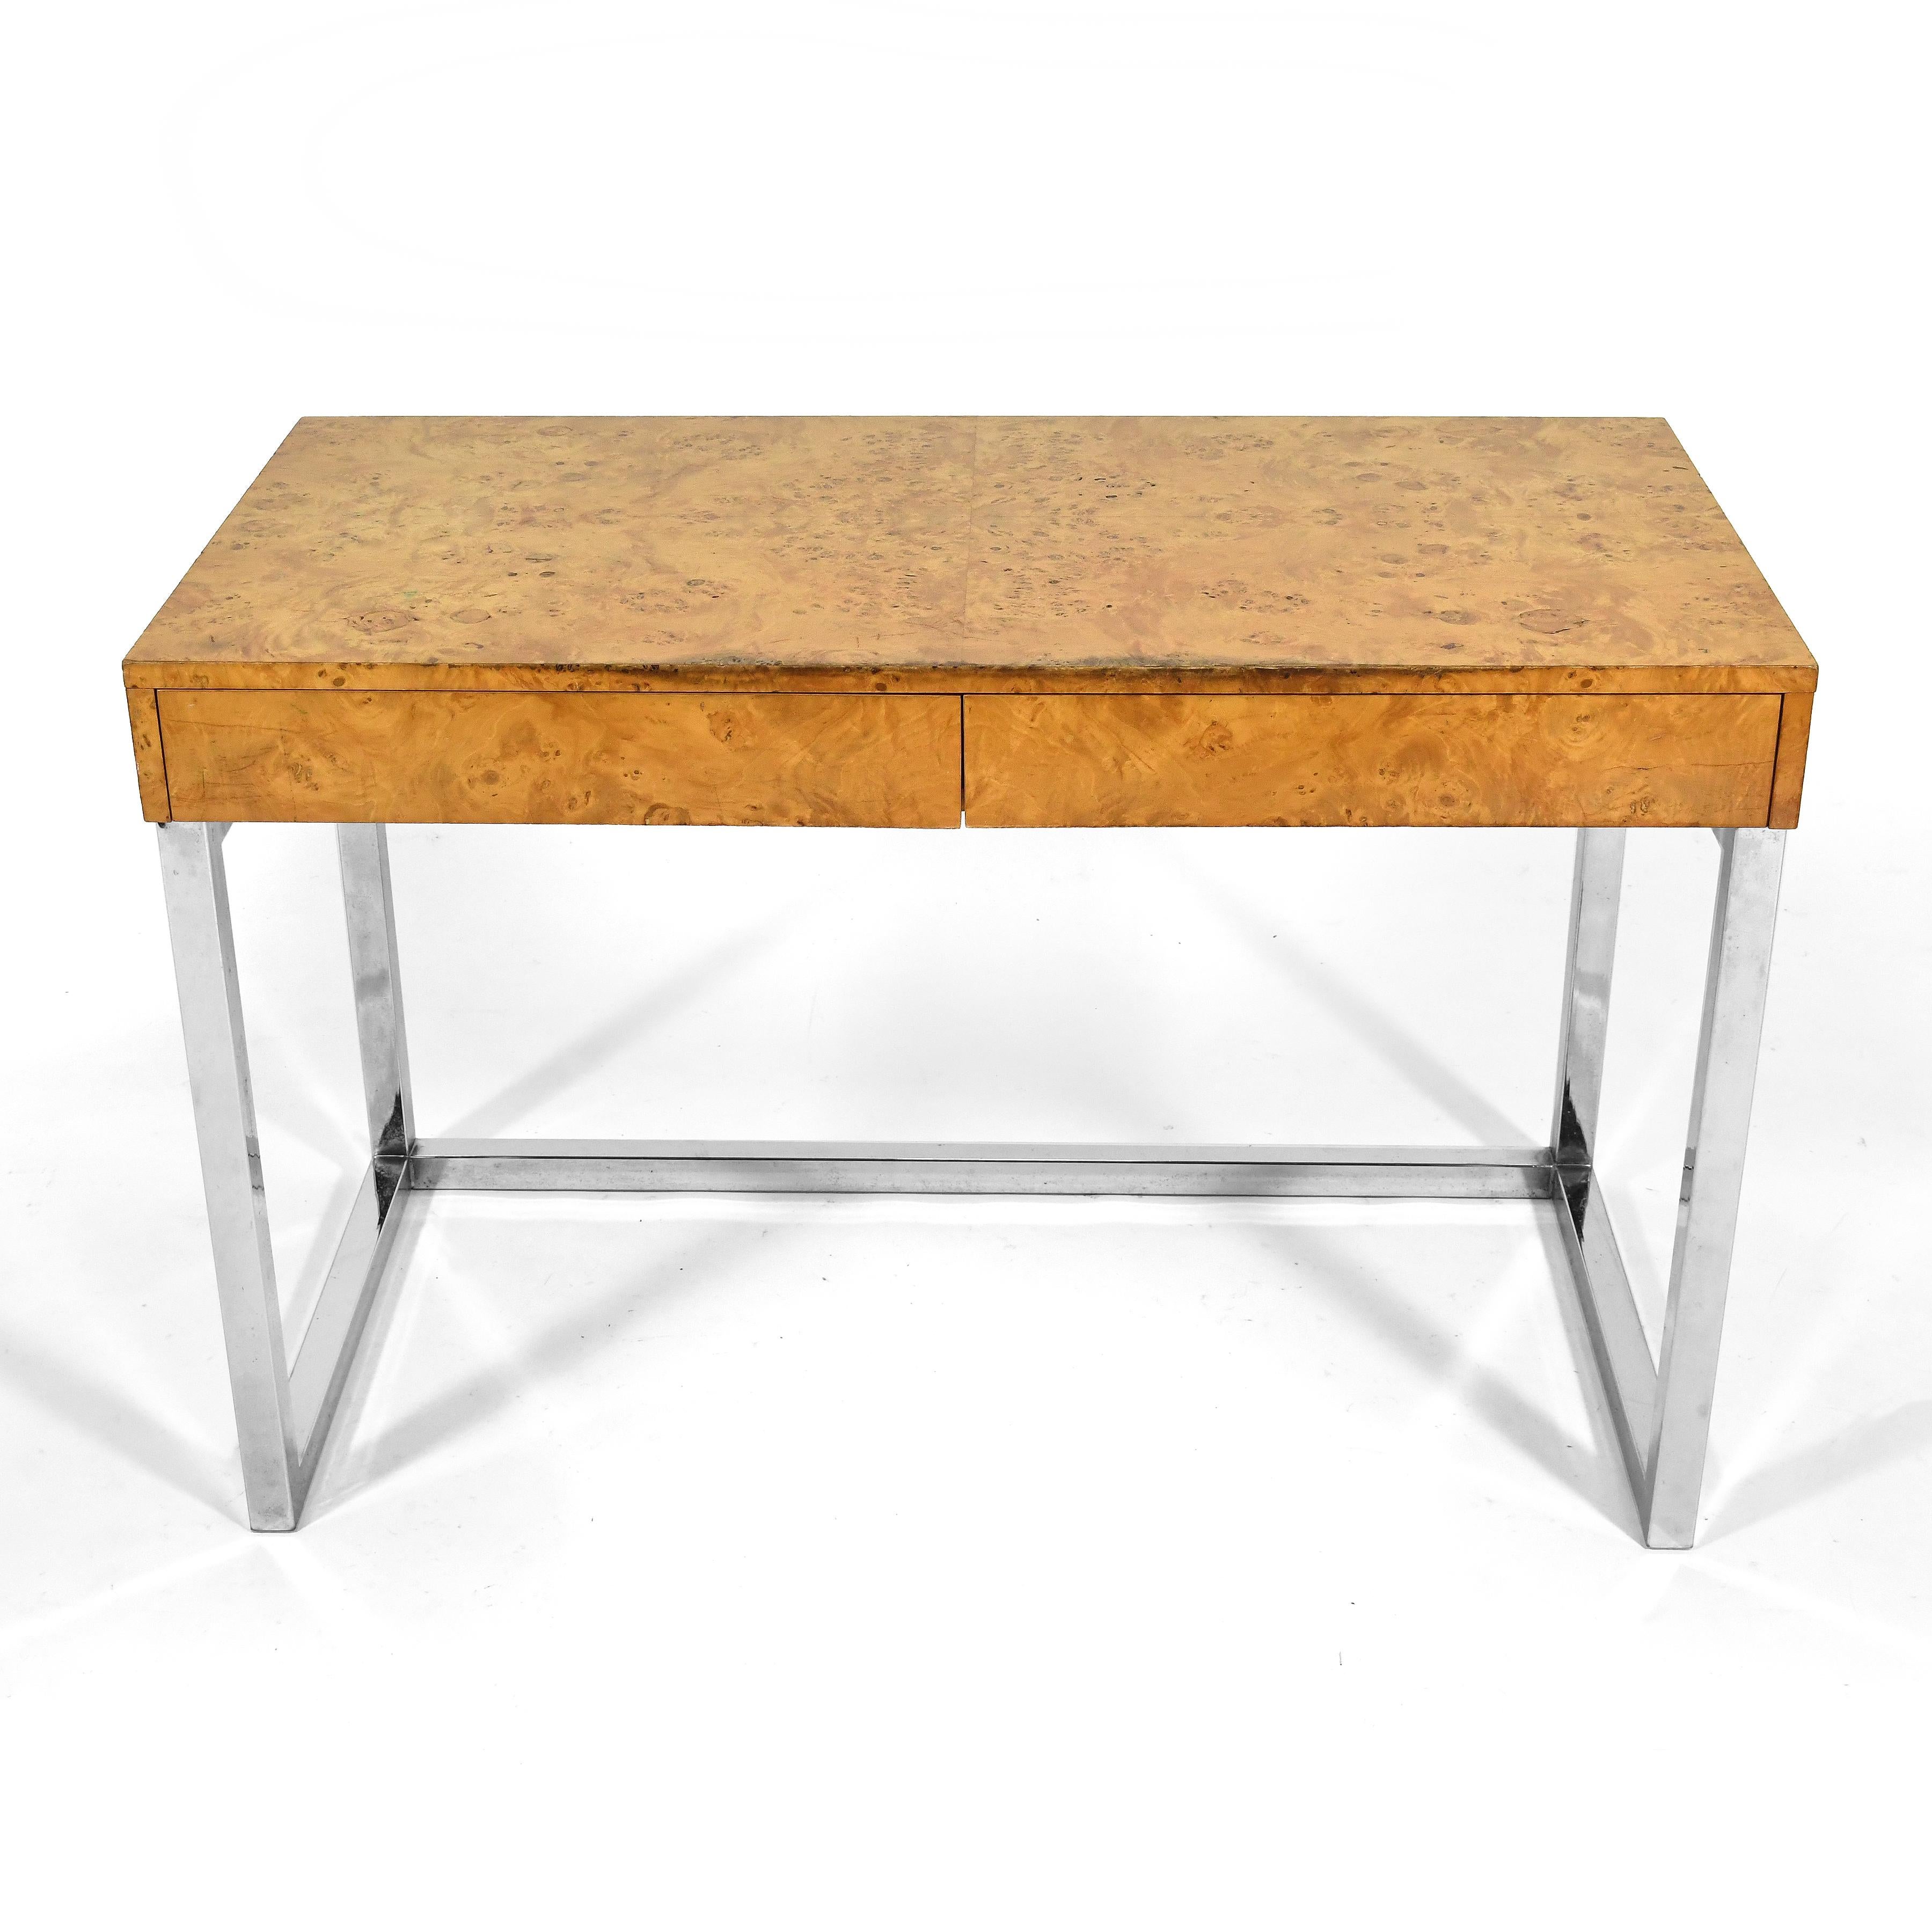 Late 20th Century Burl Wood & Chrome Desk in the Manner of Milo Baughman